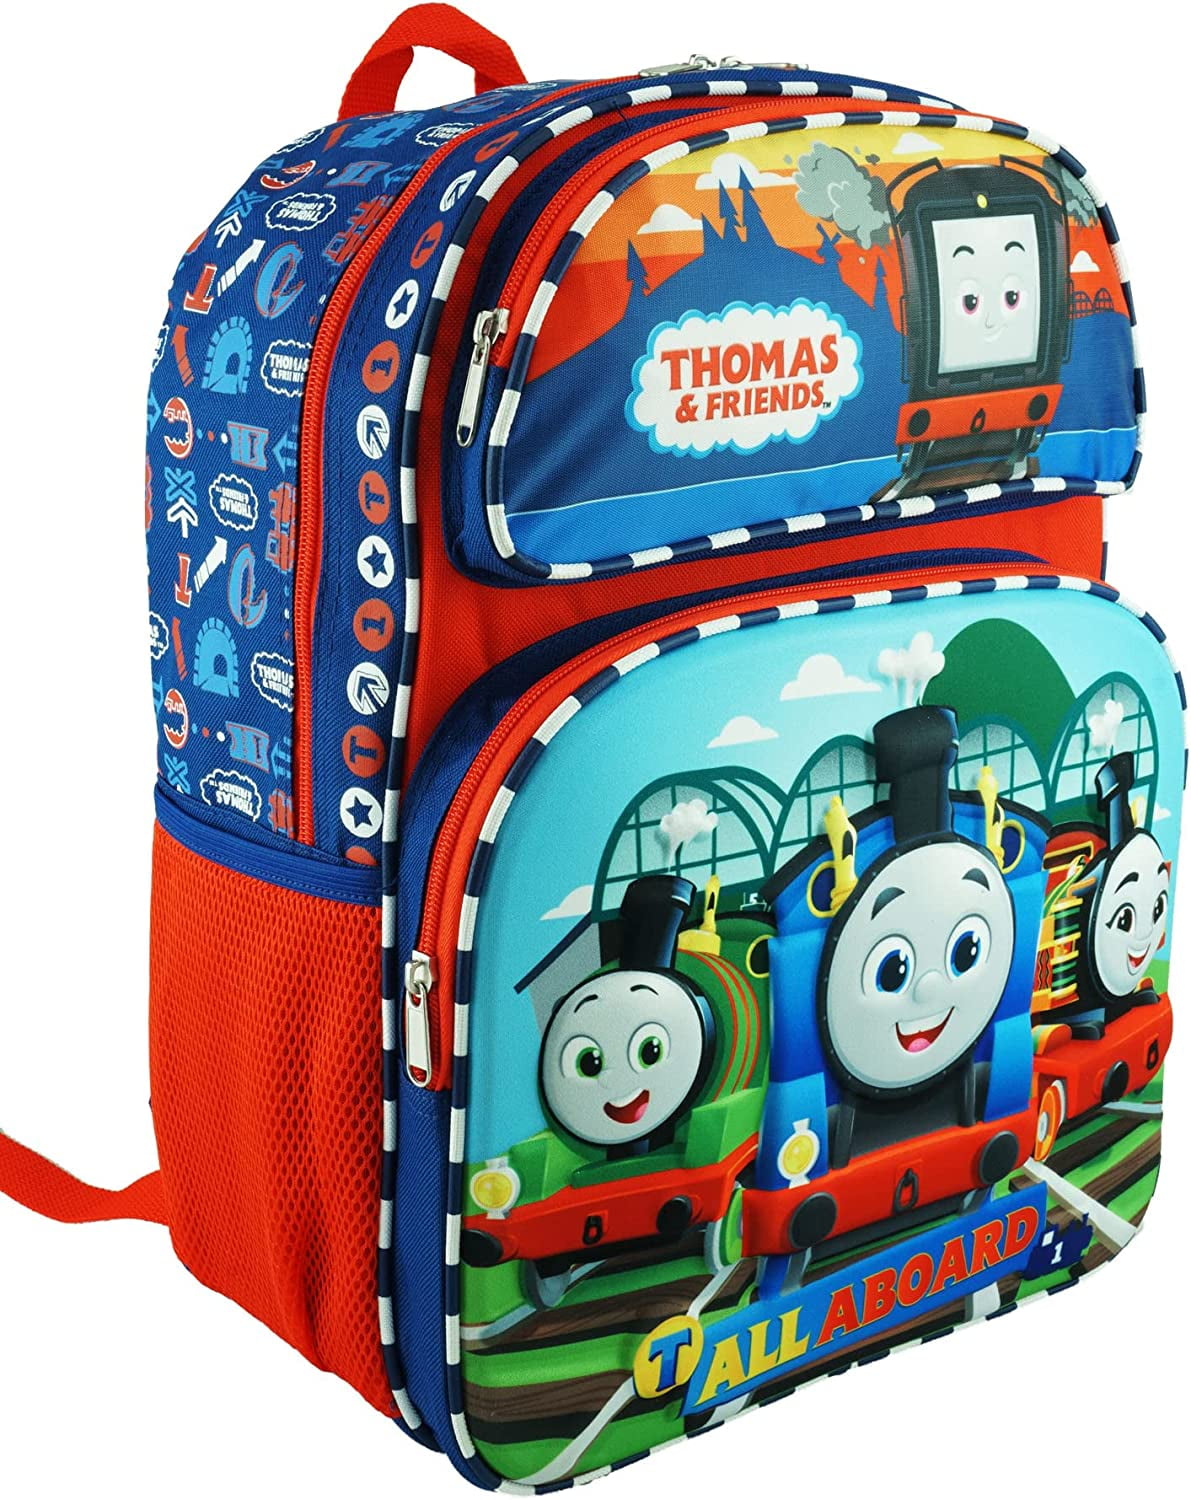 Thomas & Friends 'Ready To Go' Full Size 16 inch Backpack 